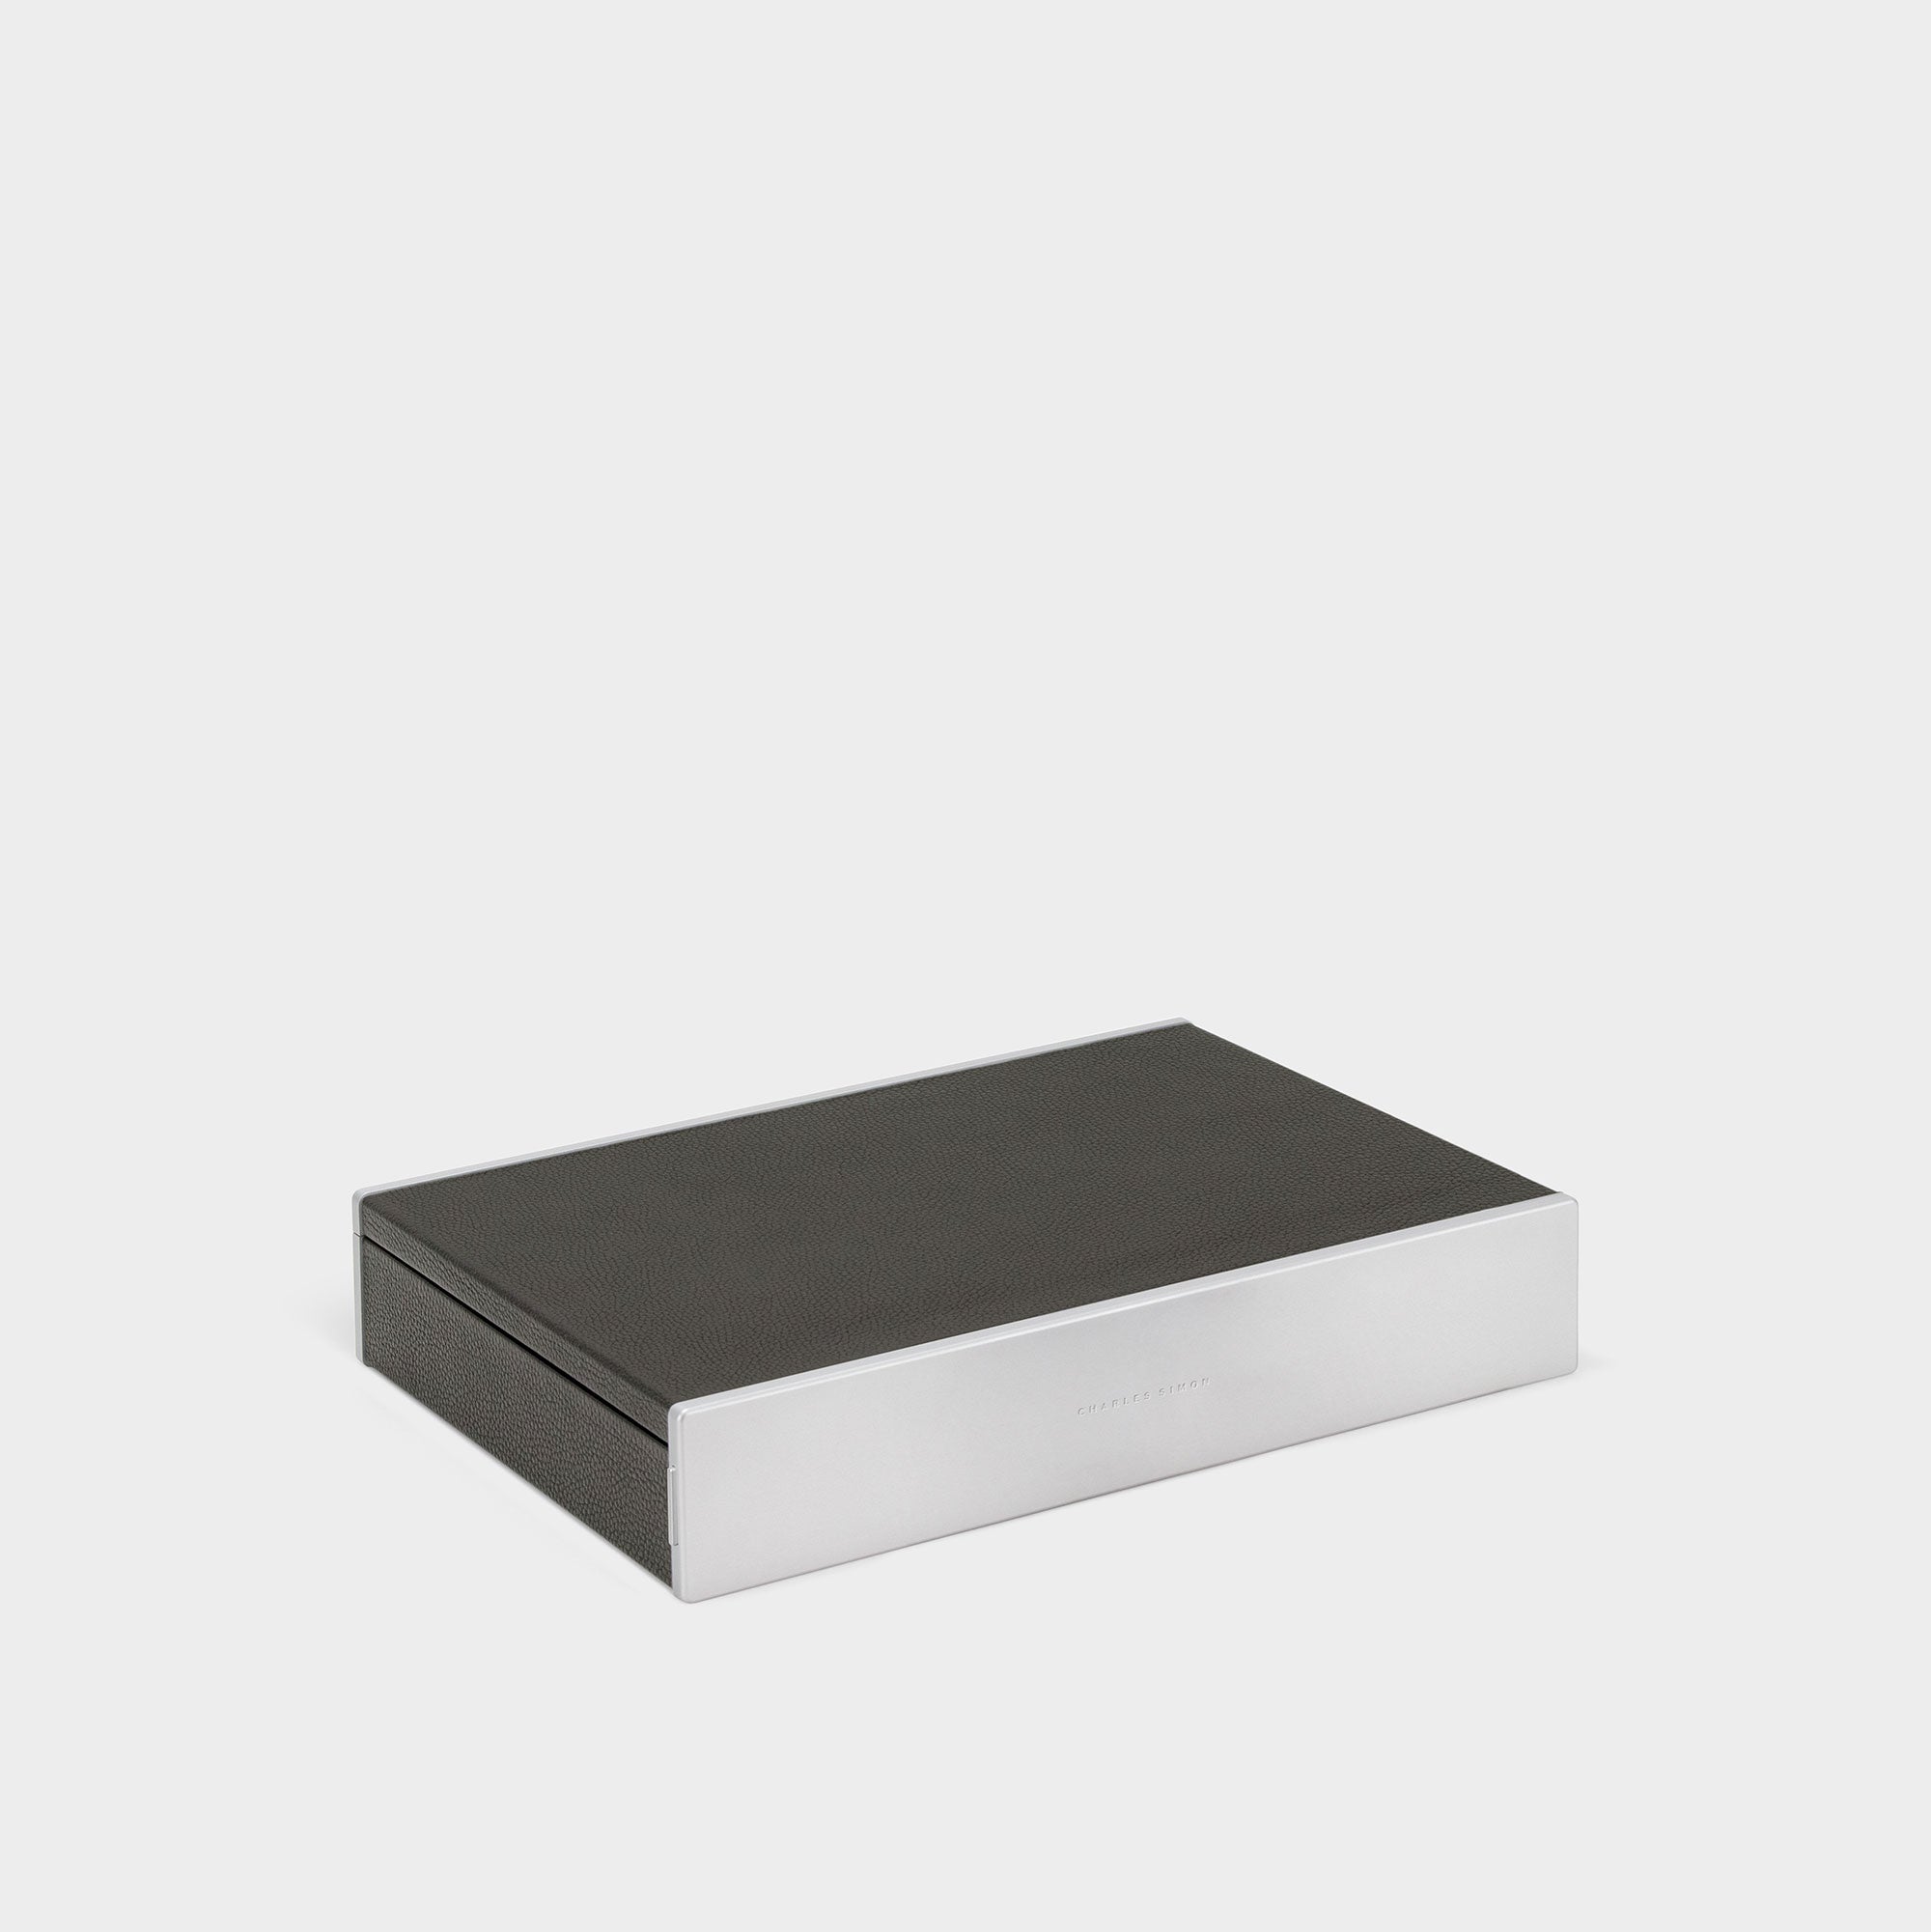 Product photo of closed graphite designer watch box by Charles Simon. Handcrafted in Canada.